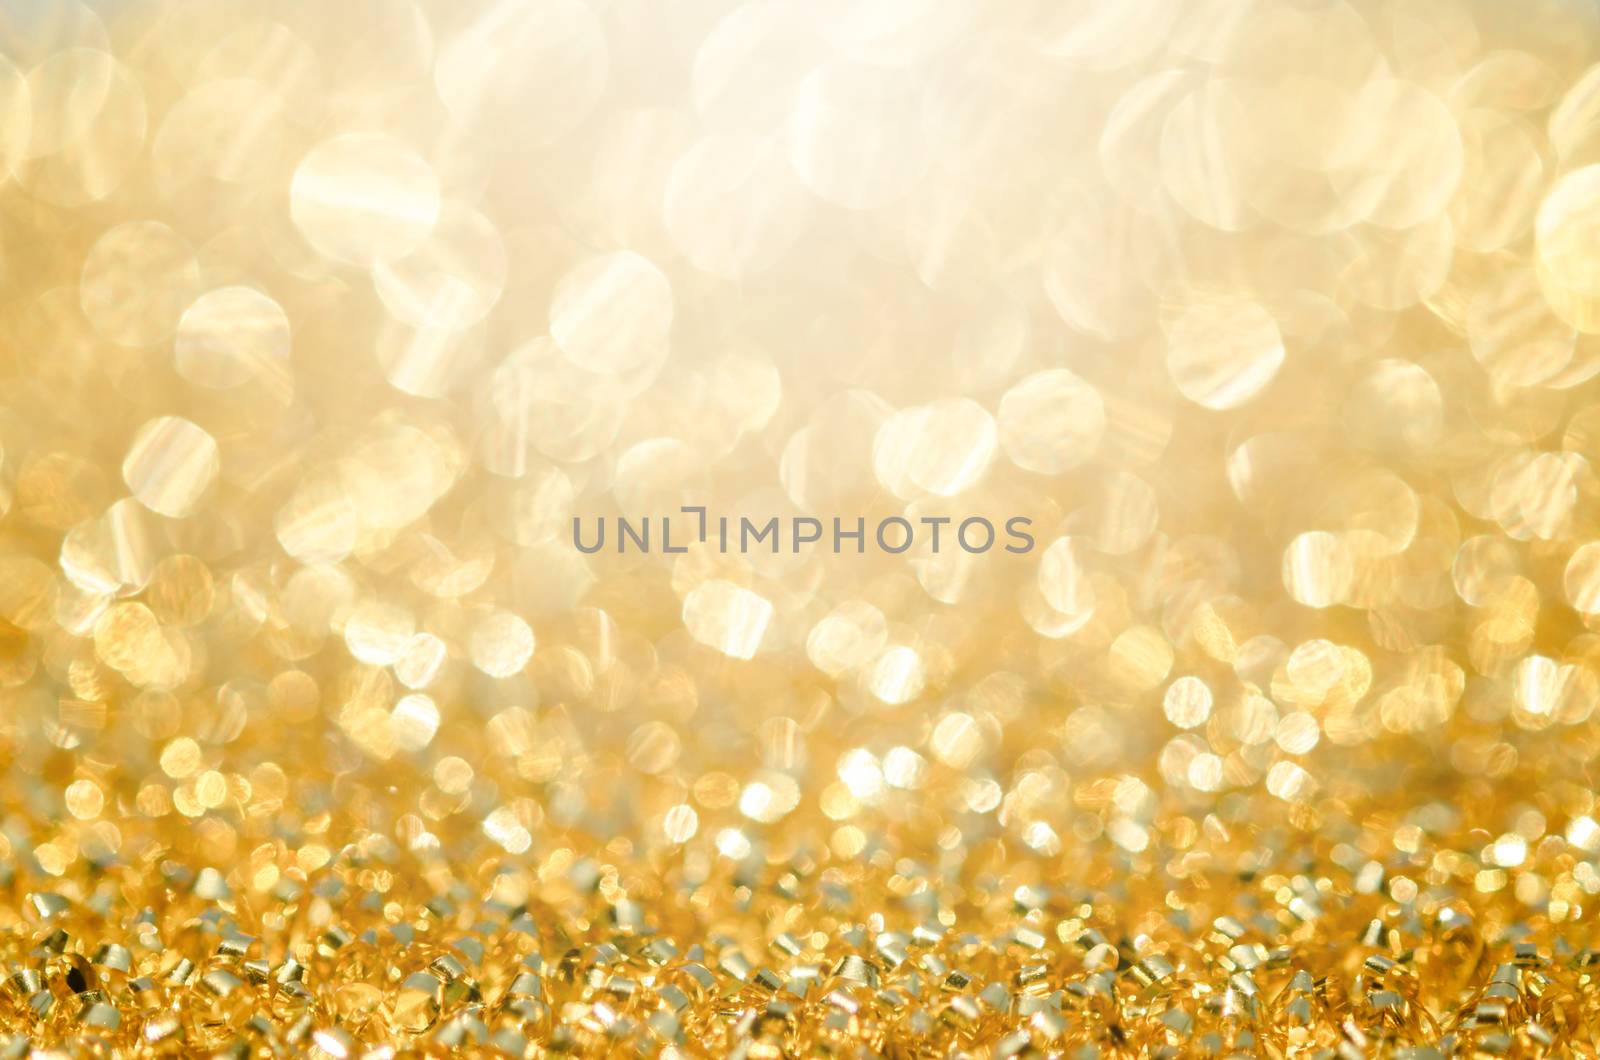 Abstract the gold light for holidays background.